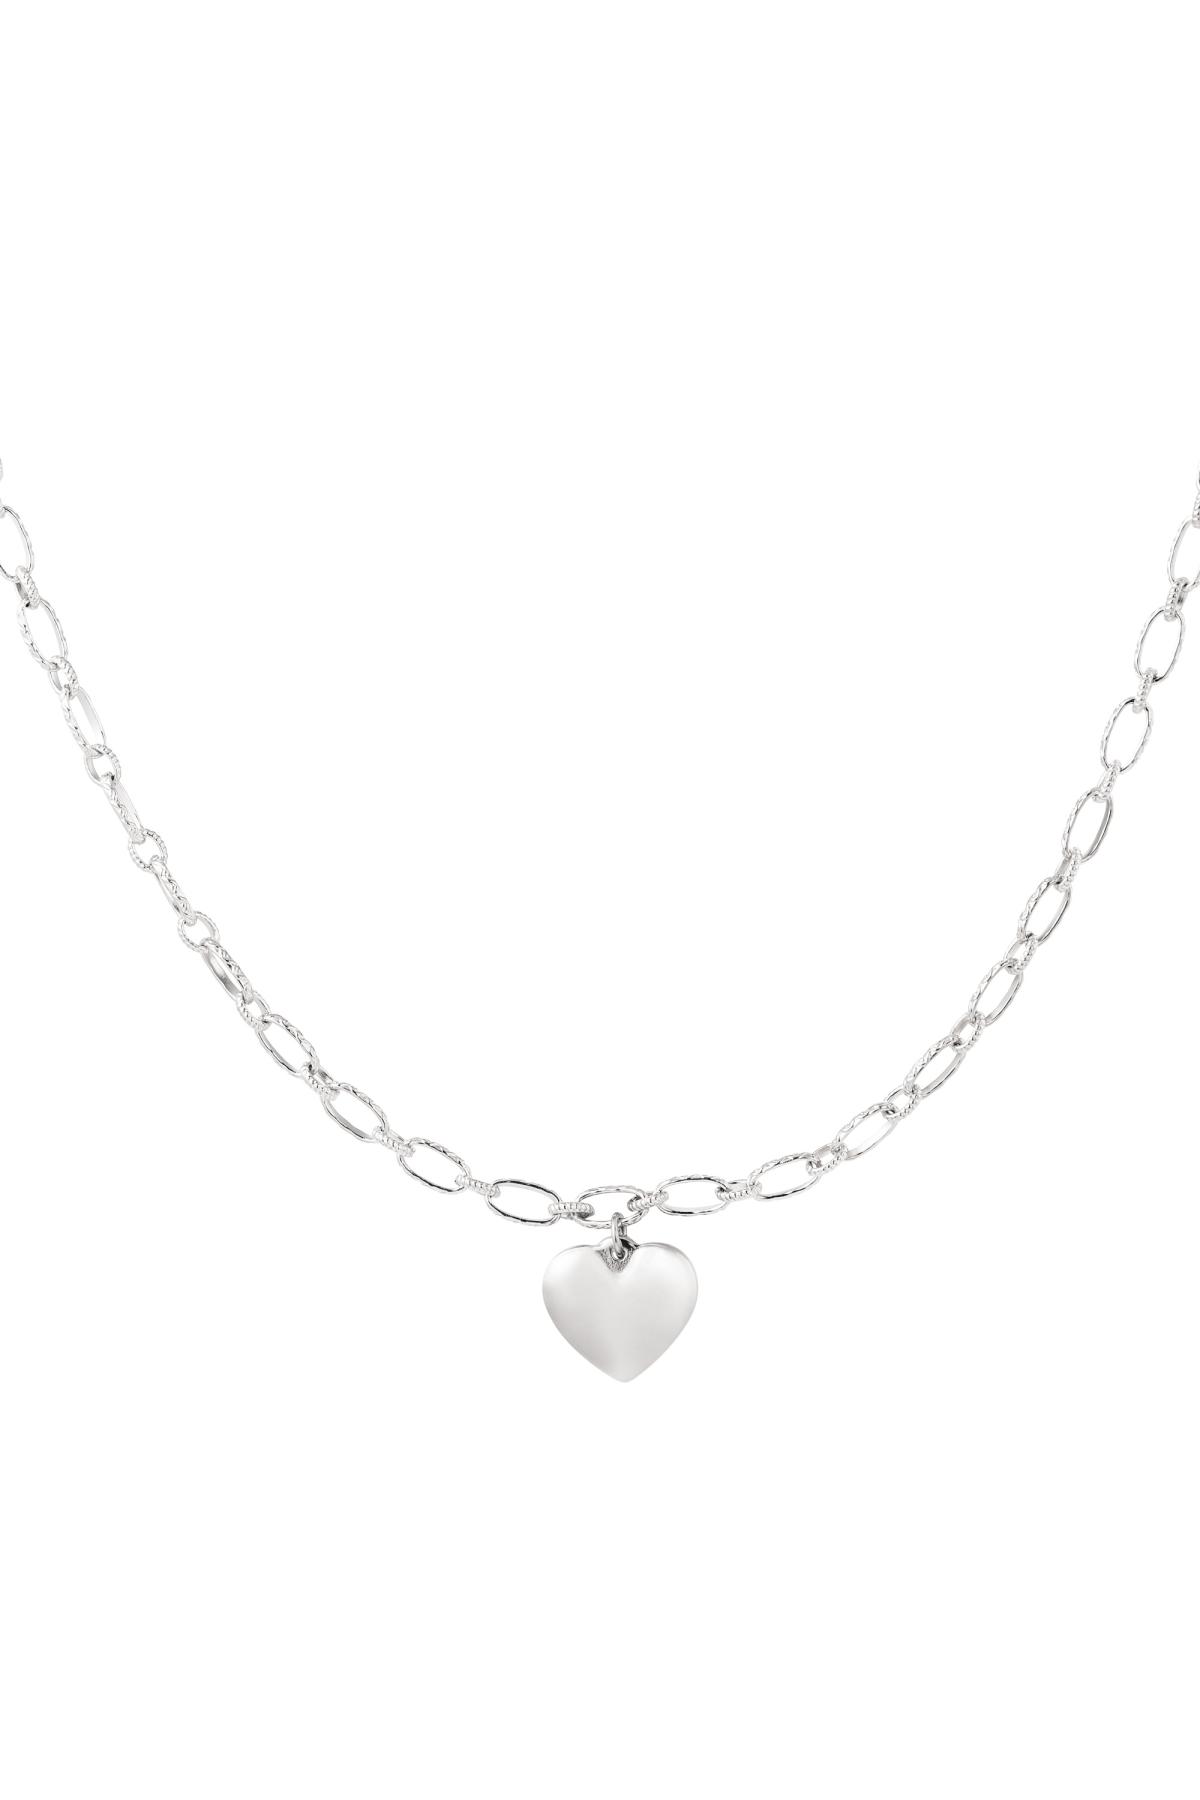 Link chain with heart Silver Stainless Steel